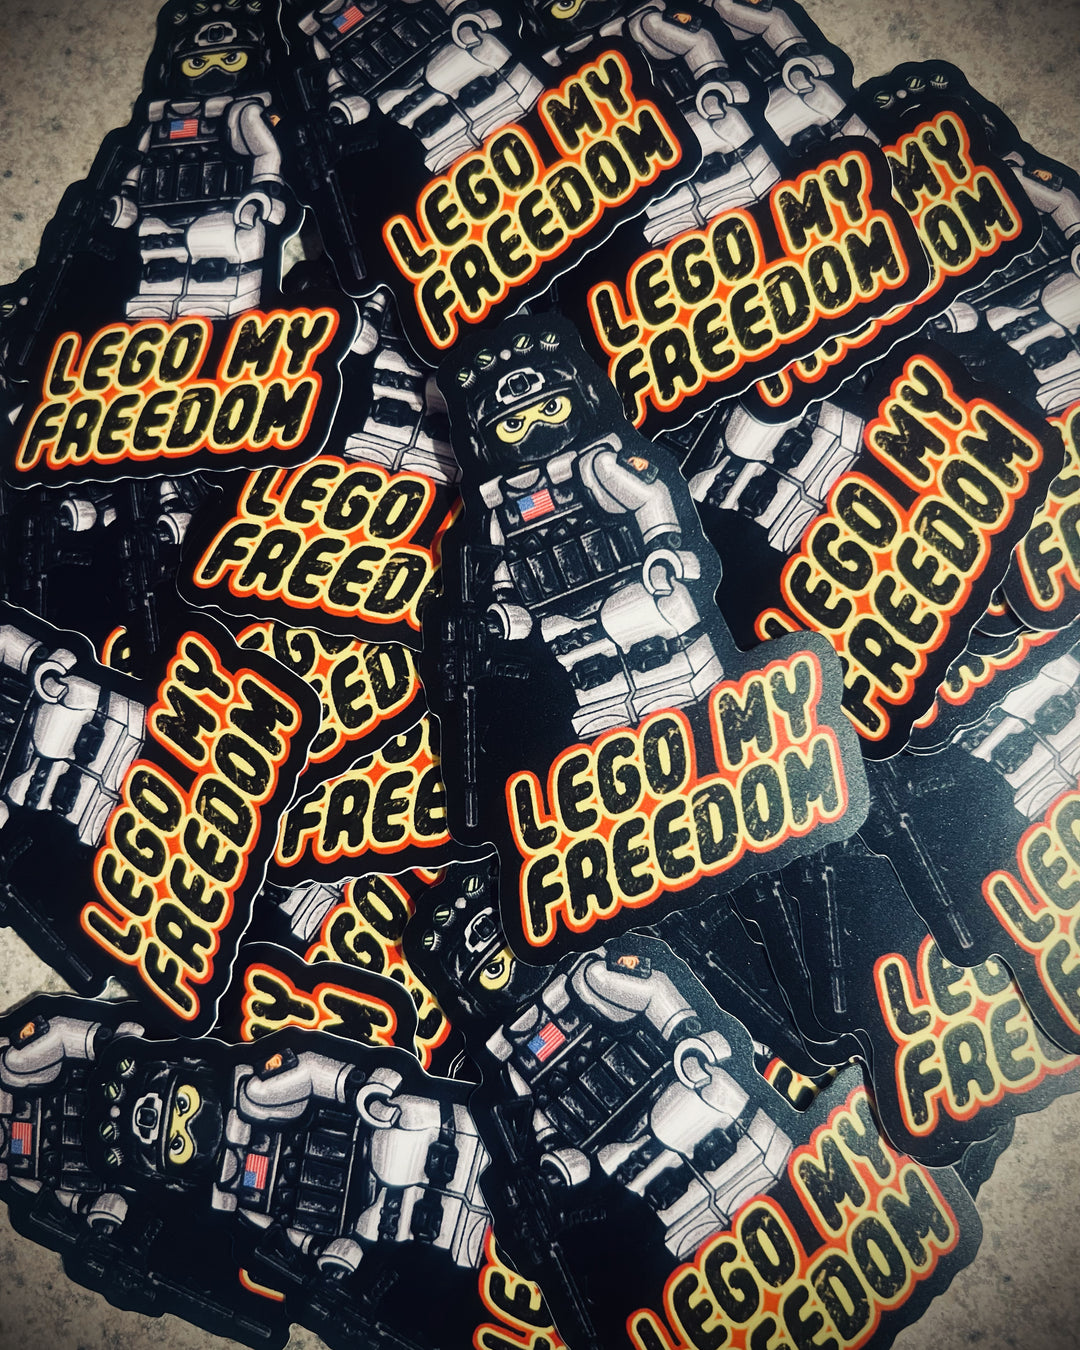 Lego My Freedom Sticker - We the People Apparel